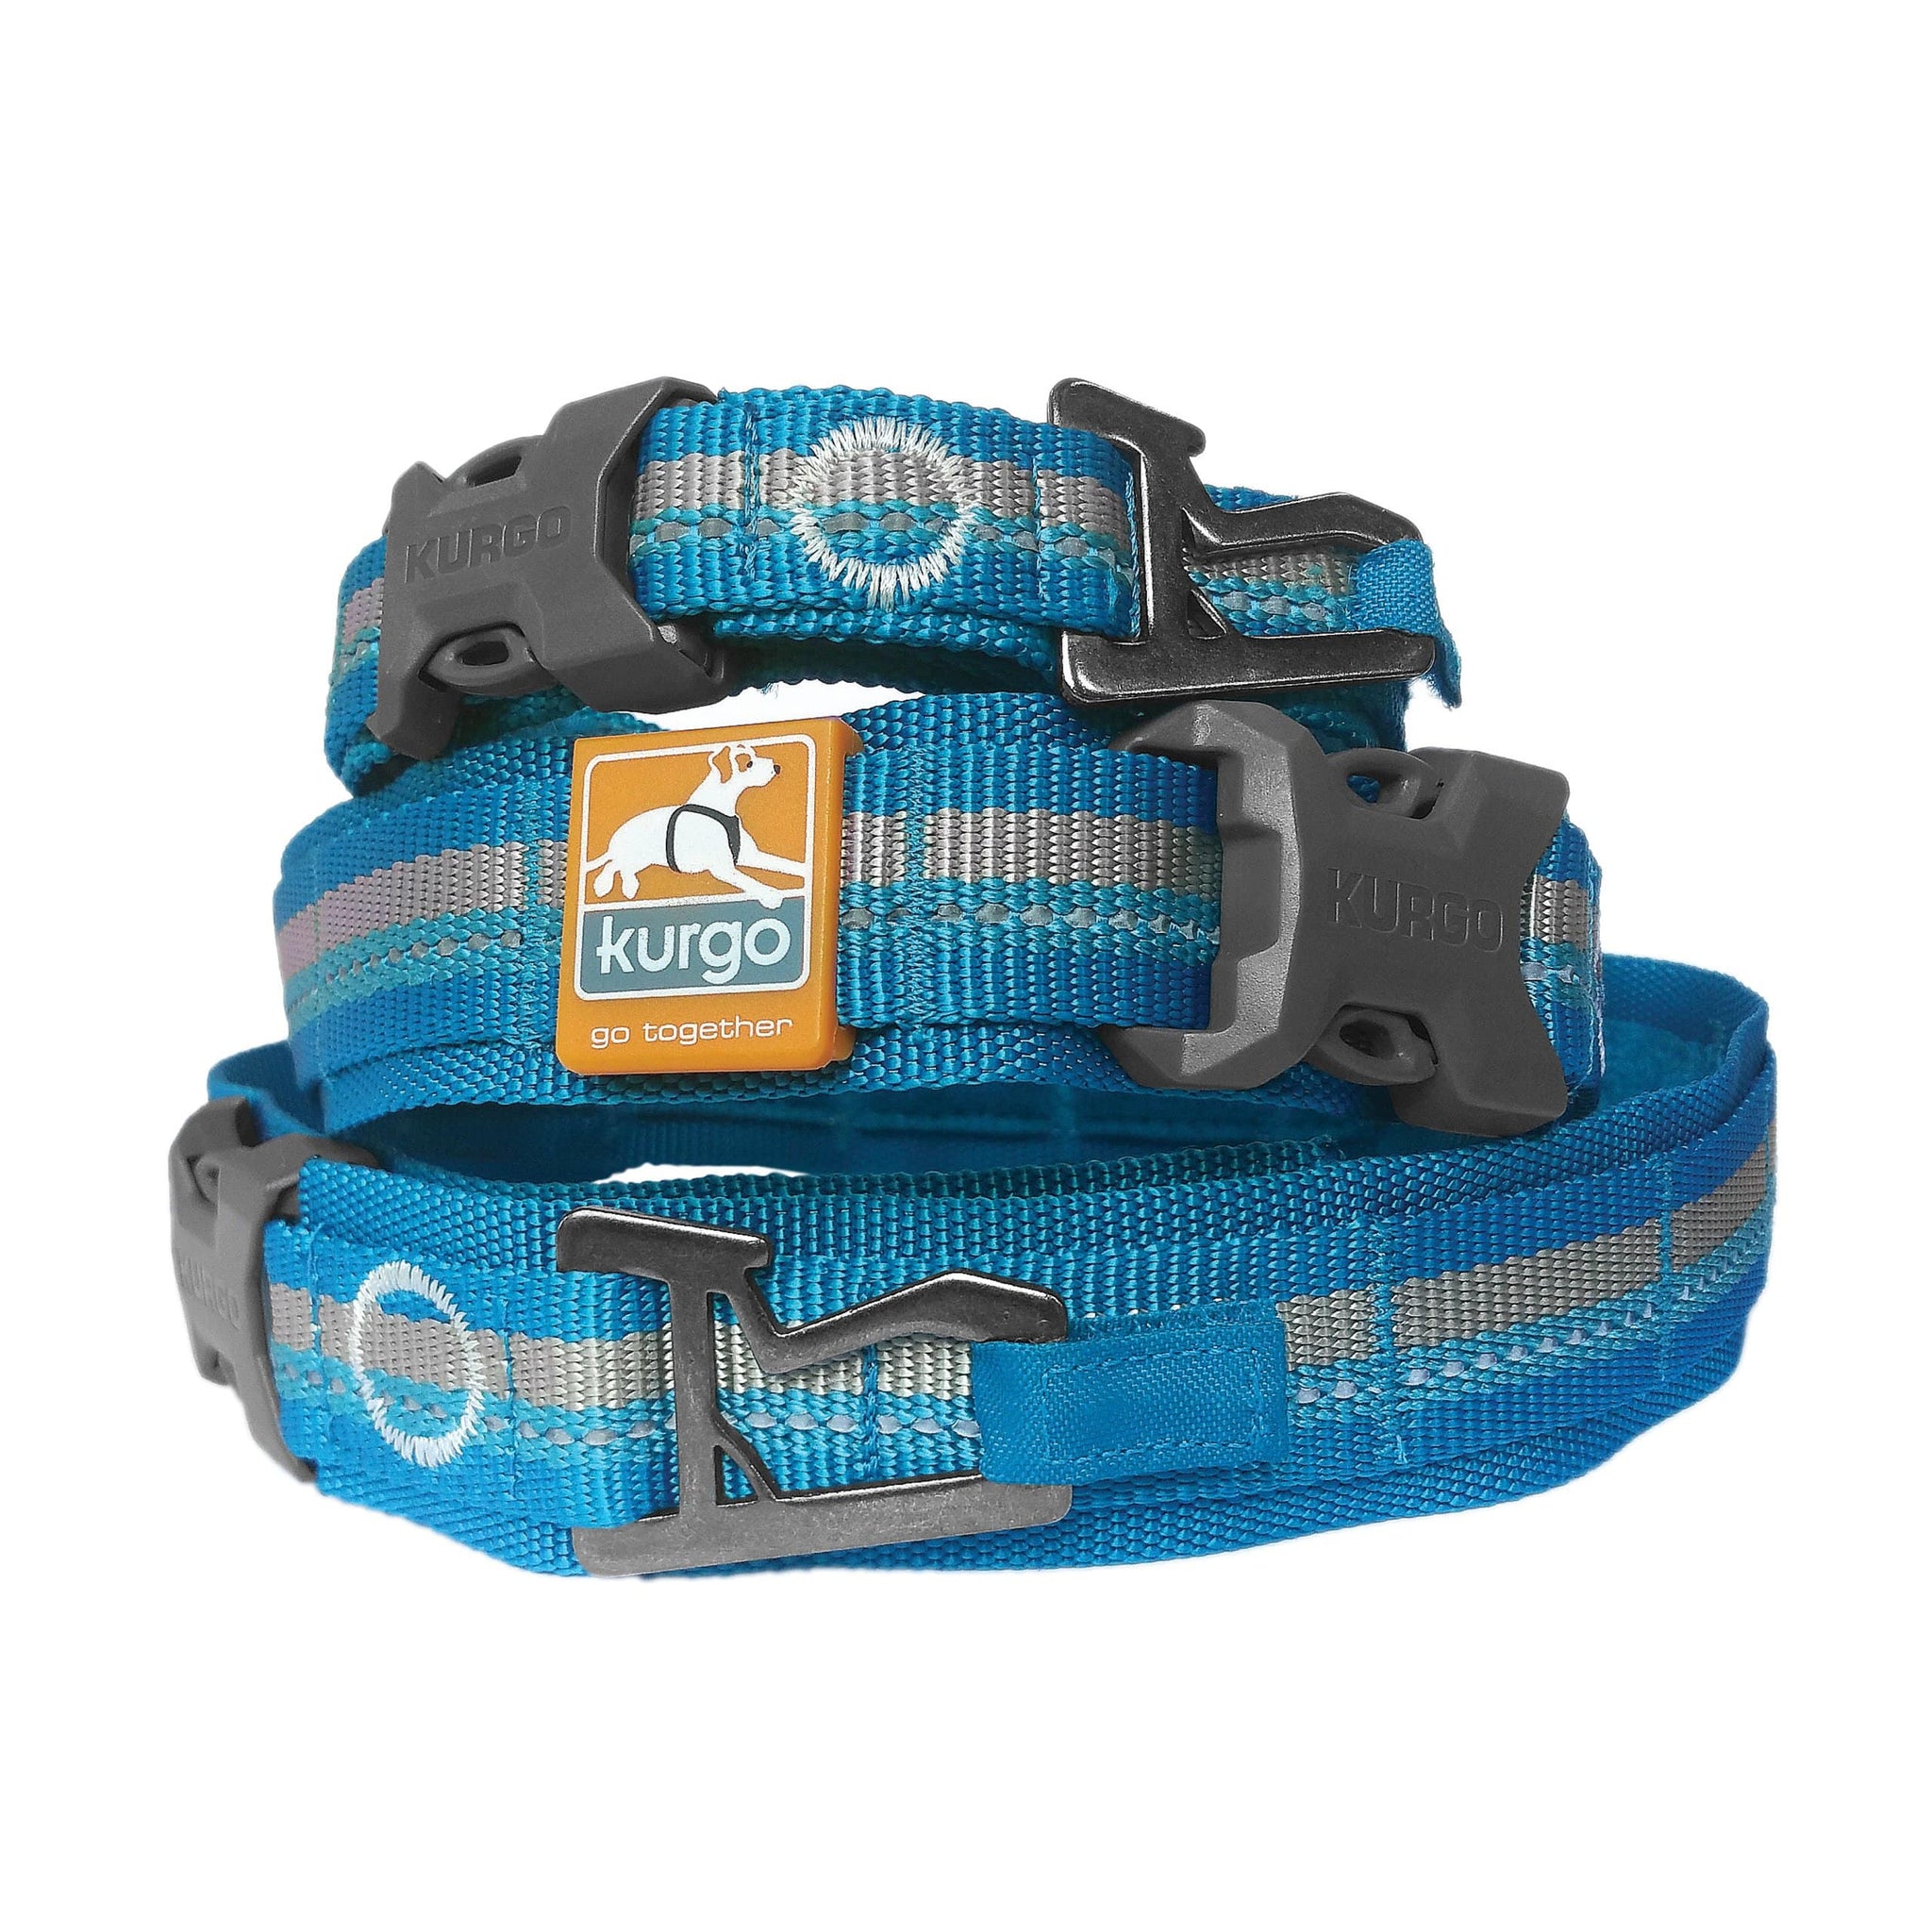 Shows the Kurgo RSG Collar sizes in blue.